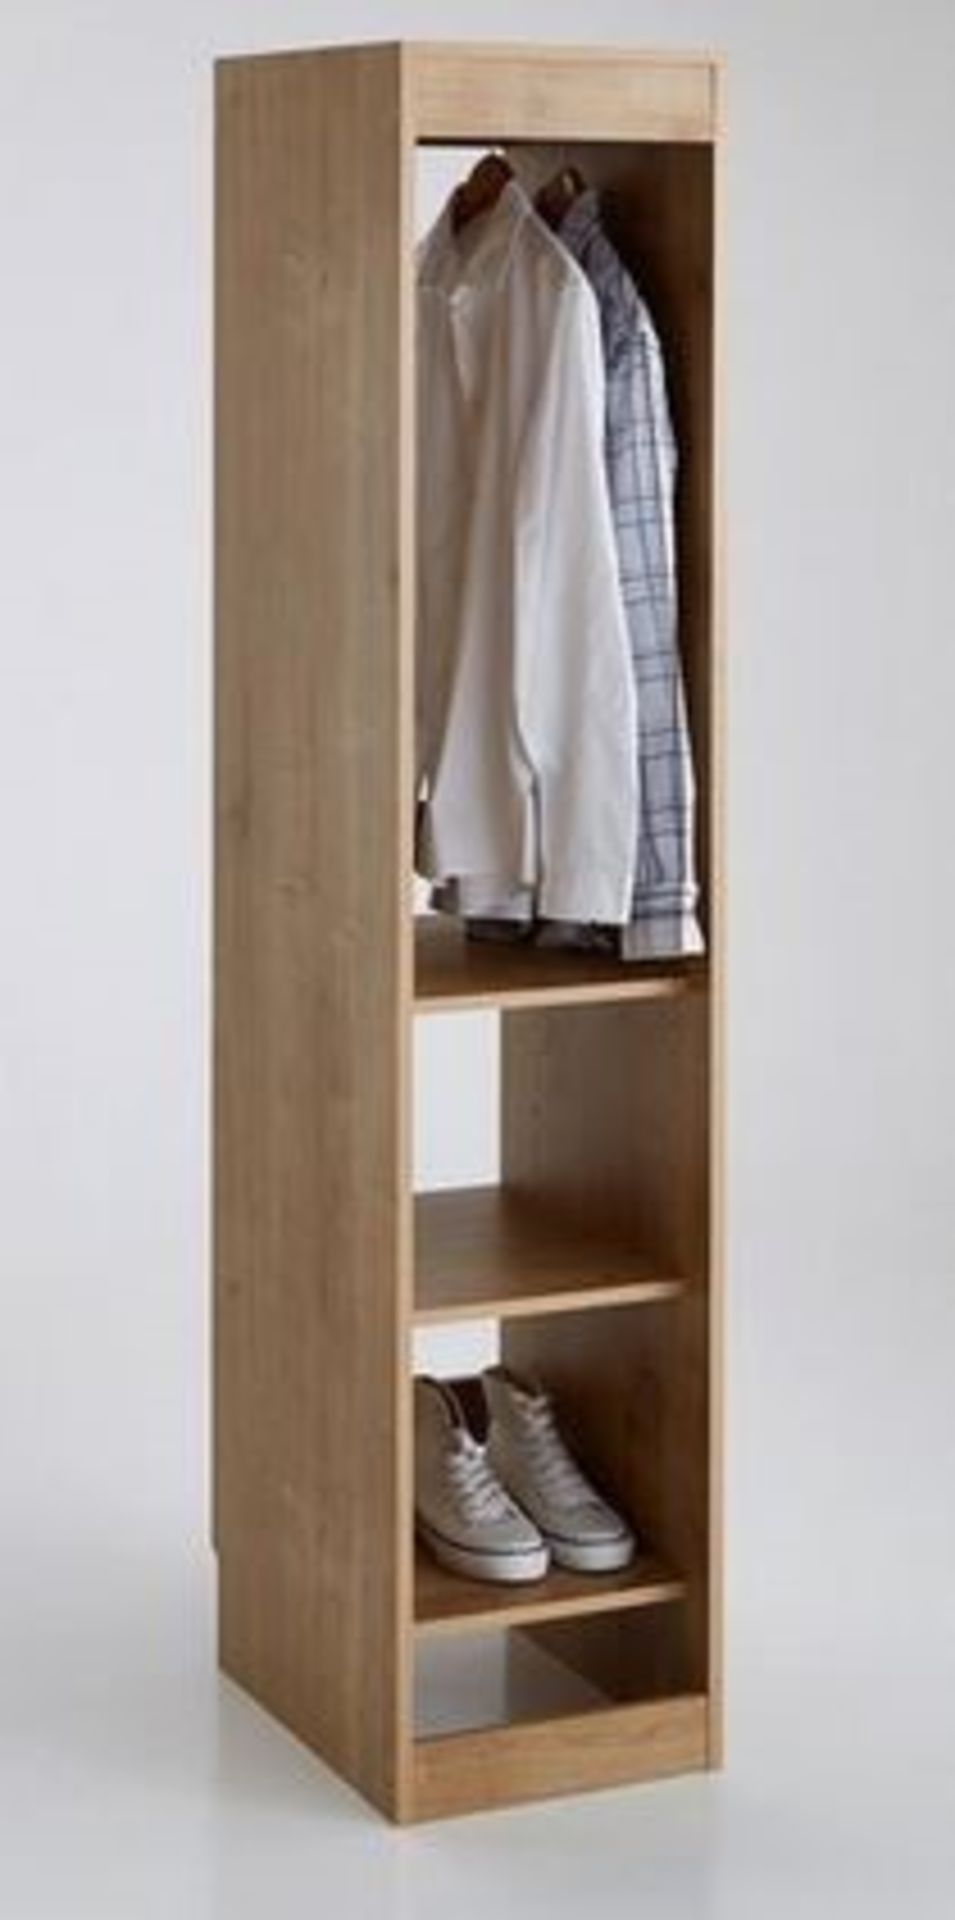 1 GRADE A BOXED DESIGNER WARDROBE MODULE IN OAK / RRP £195.00 (PUBLIC VIEWING AVAILABLE) - Image 2 of 2